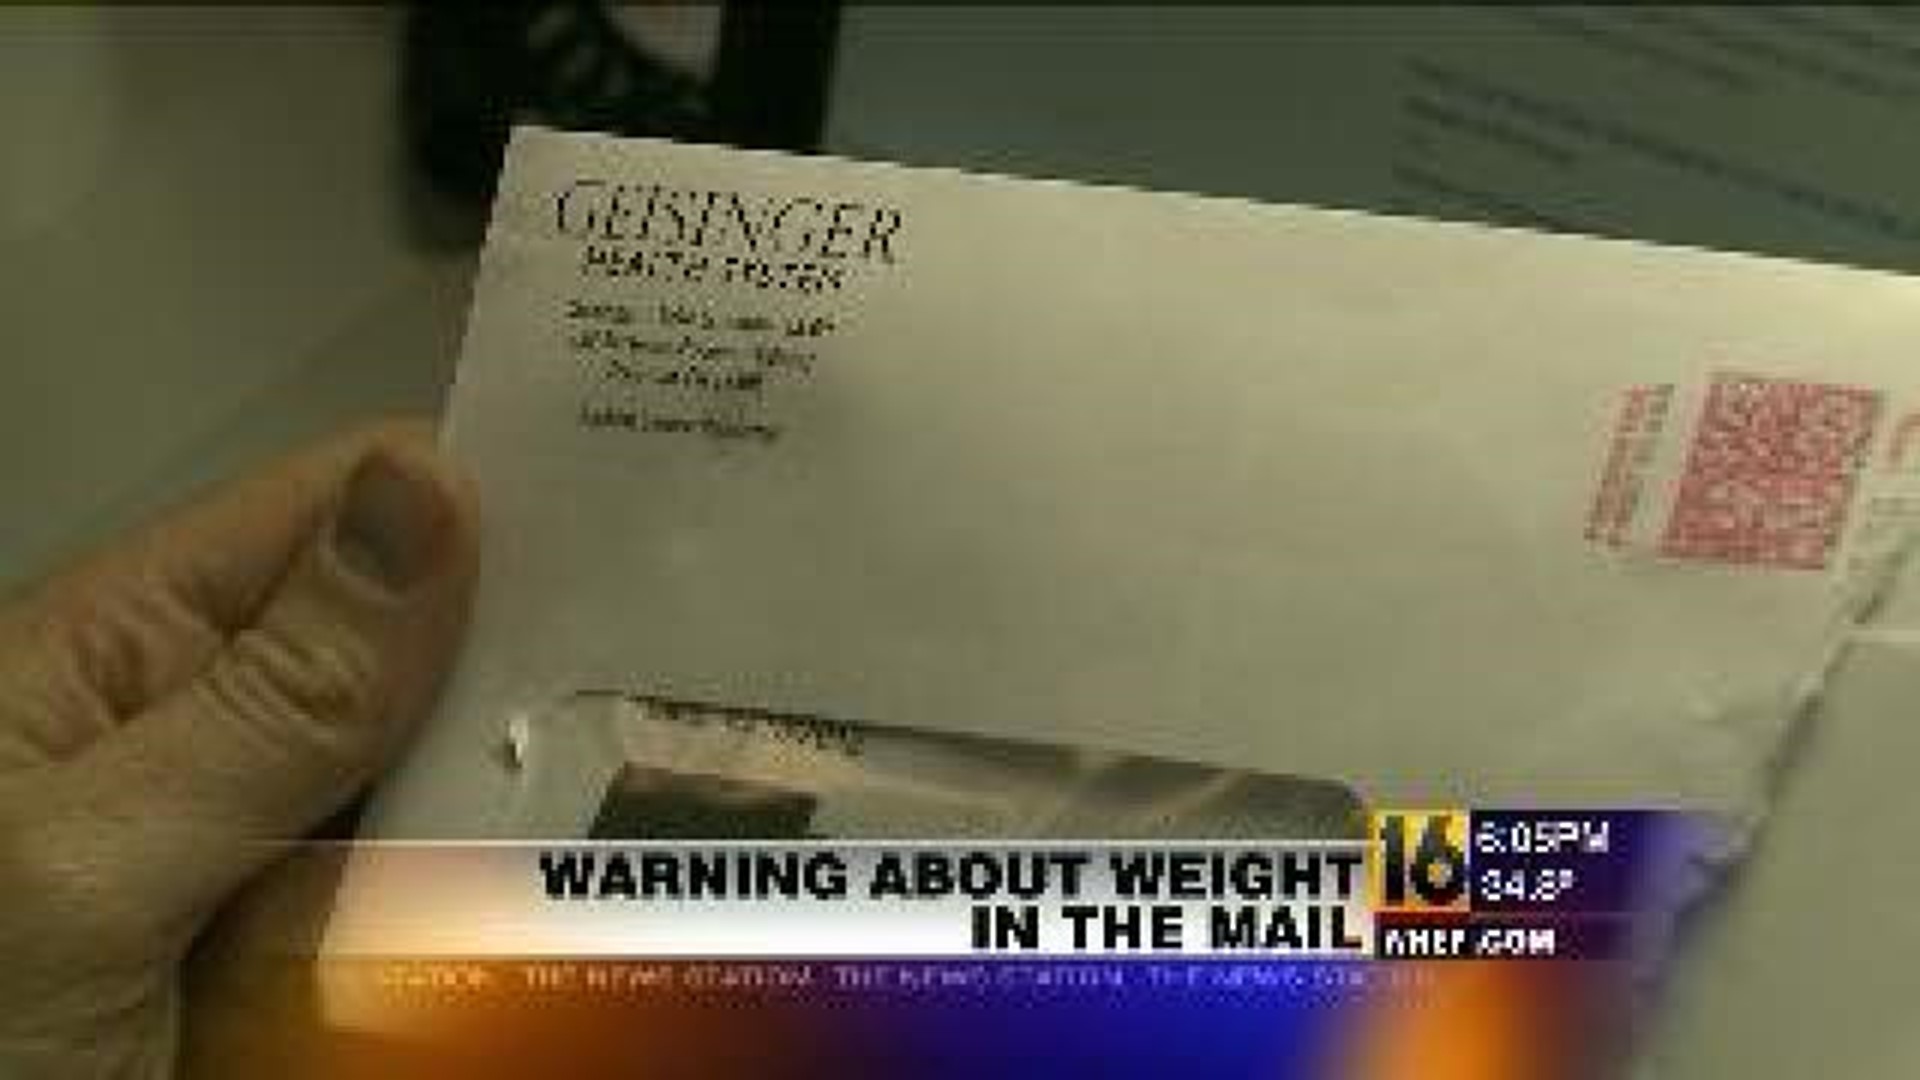 Warning About Weight in the Mail